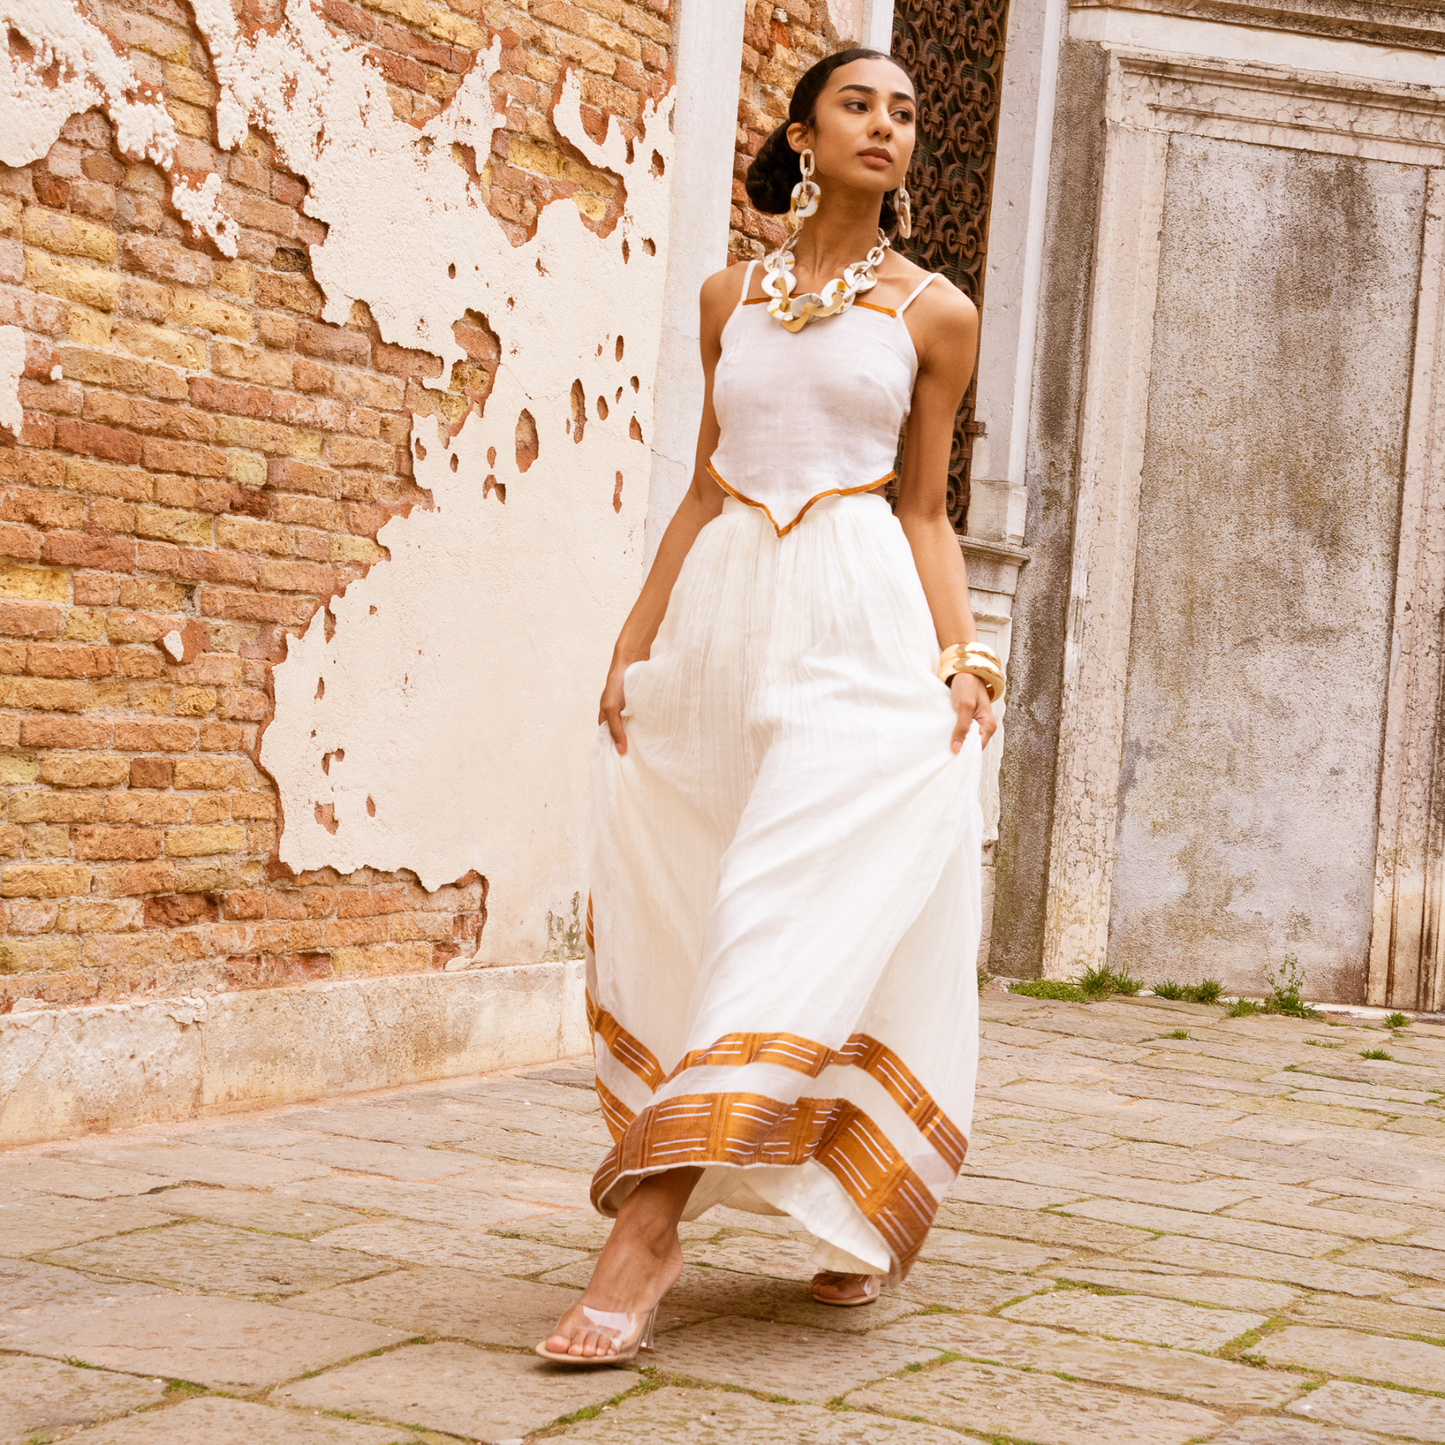  Discover the beauty of our 2-piece set: a handwoven maxi skirt and a hand-embroidered string top. Made from 100% Ethiopian cotton, each piece is unique and one-of-a-kind. The flowing fit of the maxi skirt suits any occasion, while the stylish string top is perfect for warm weather. Hand-embroidered details add stunning texture. Handmade for comfort and style, whether it's the beach or a formal event, this set is a perfect choice.